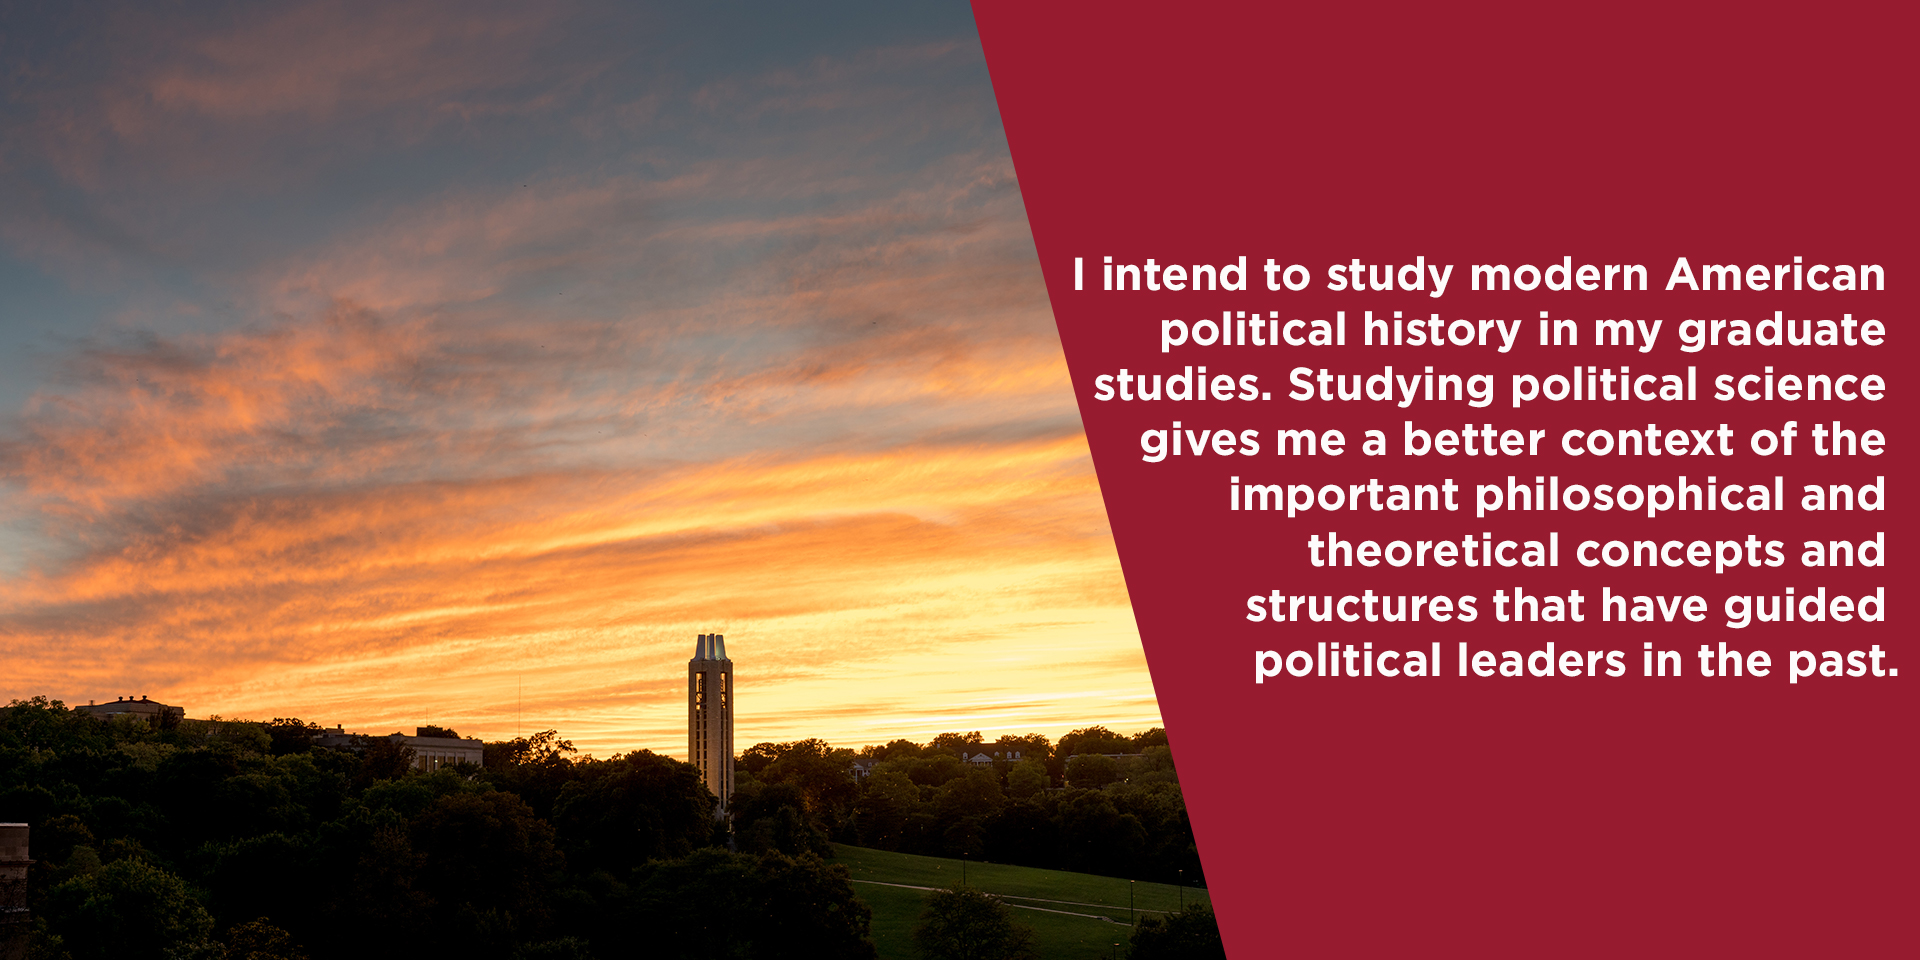 I intend to study modern American political history in my graduate studies. Studying political science gives me a better context of the important philosophical and theoretical concepts and structures that have guided political leaders in the past.